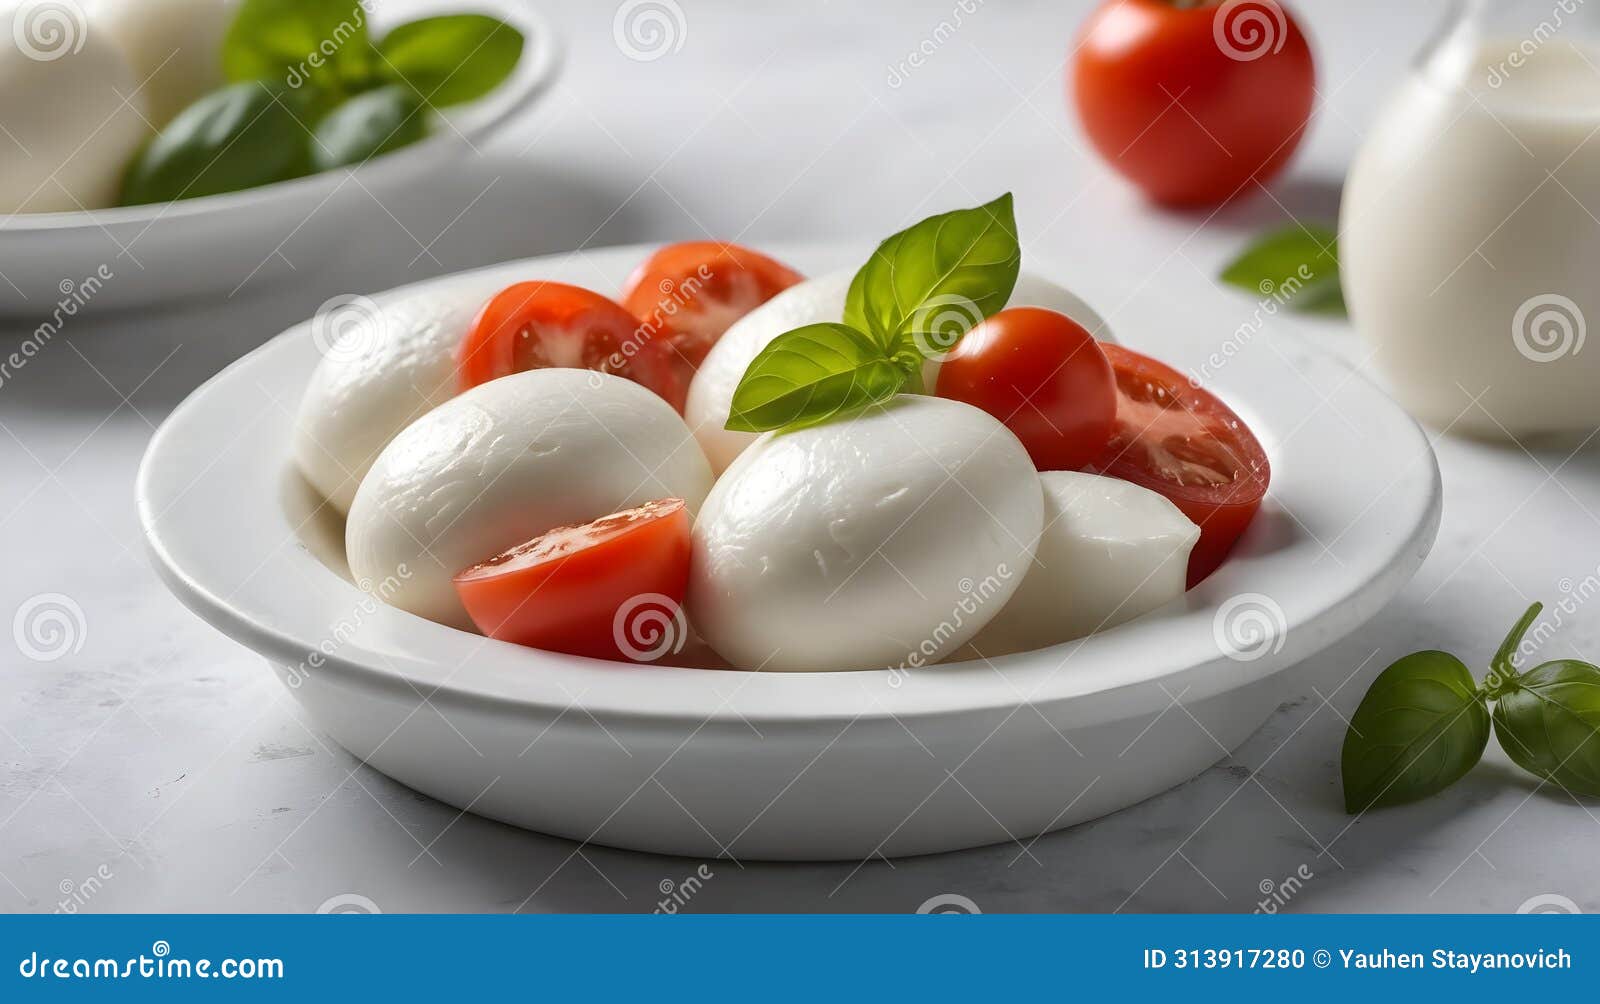 mozzarella typical italian product derived from milk with tomatoes